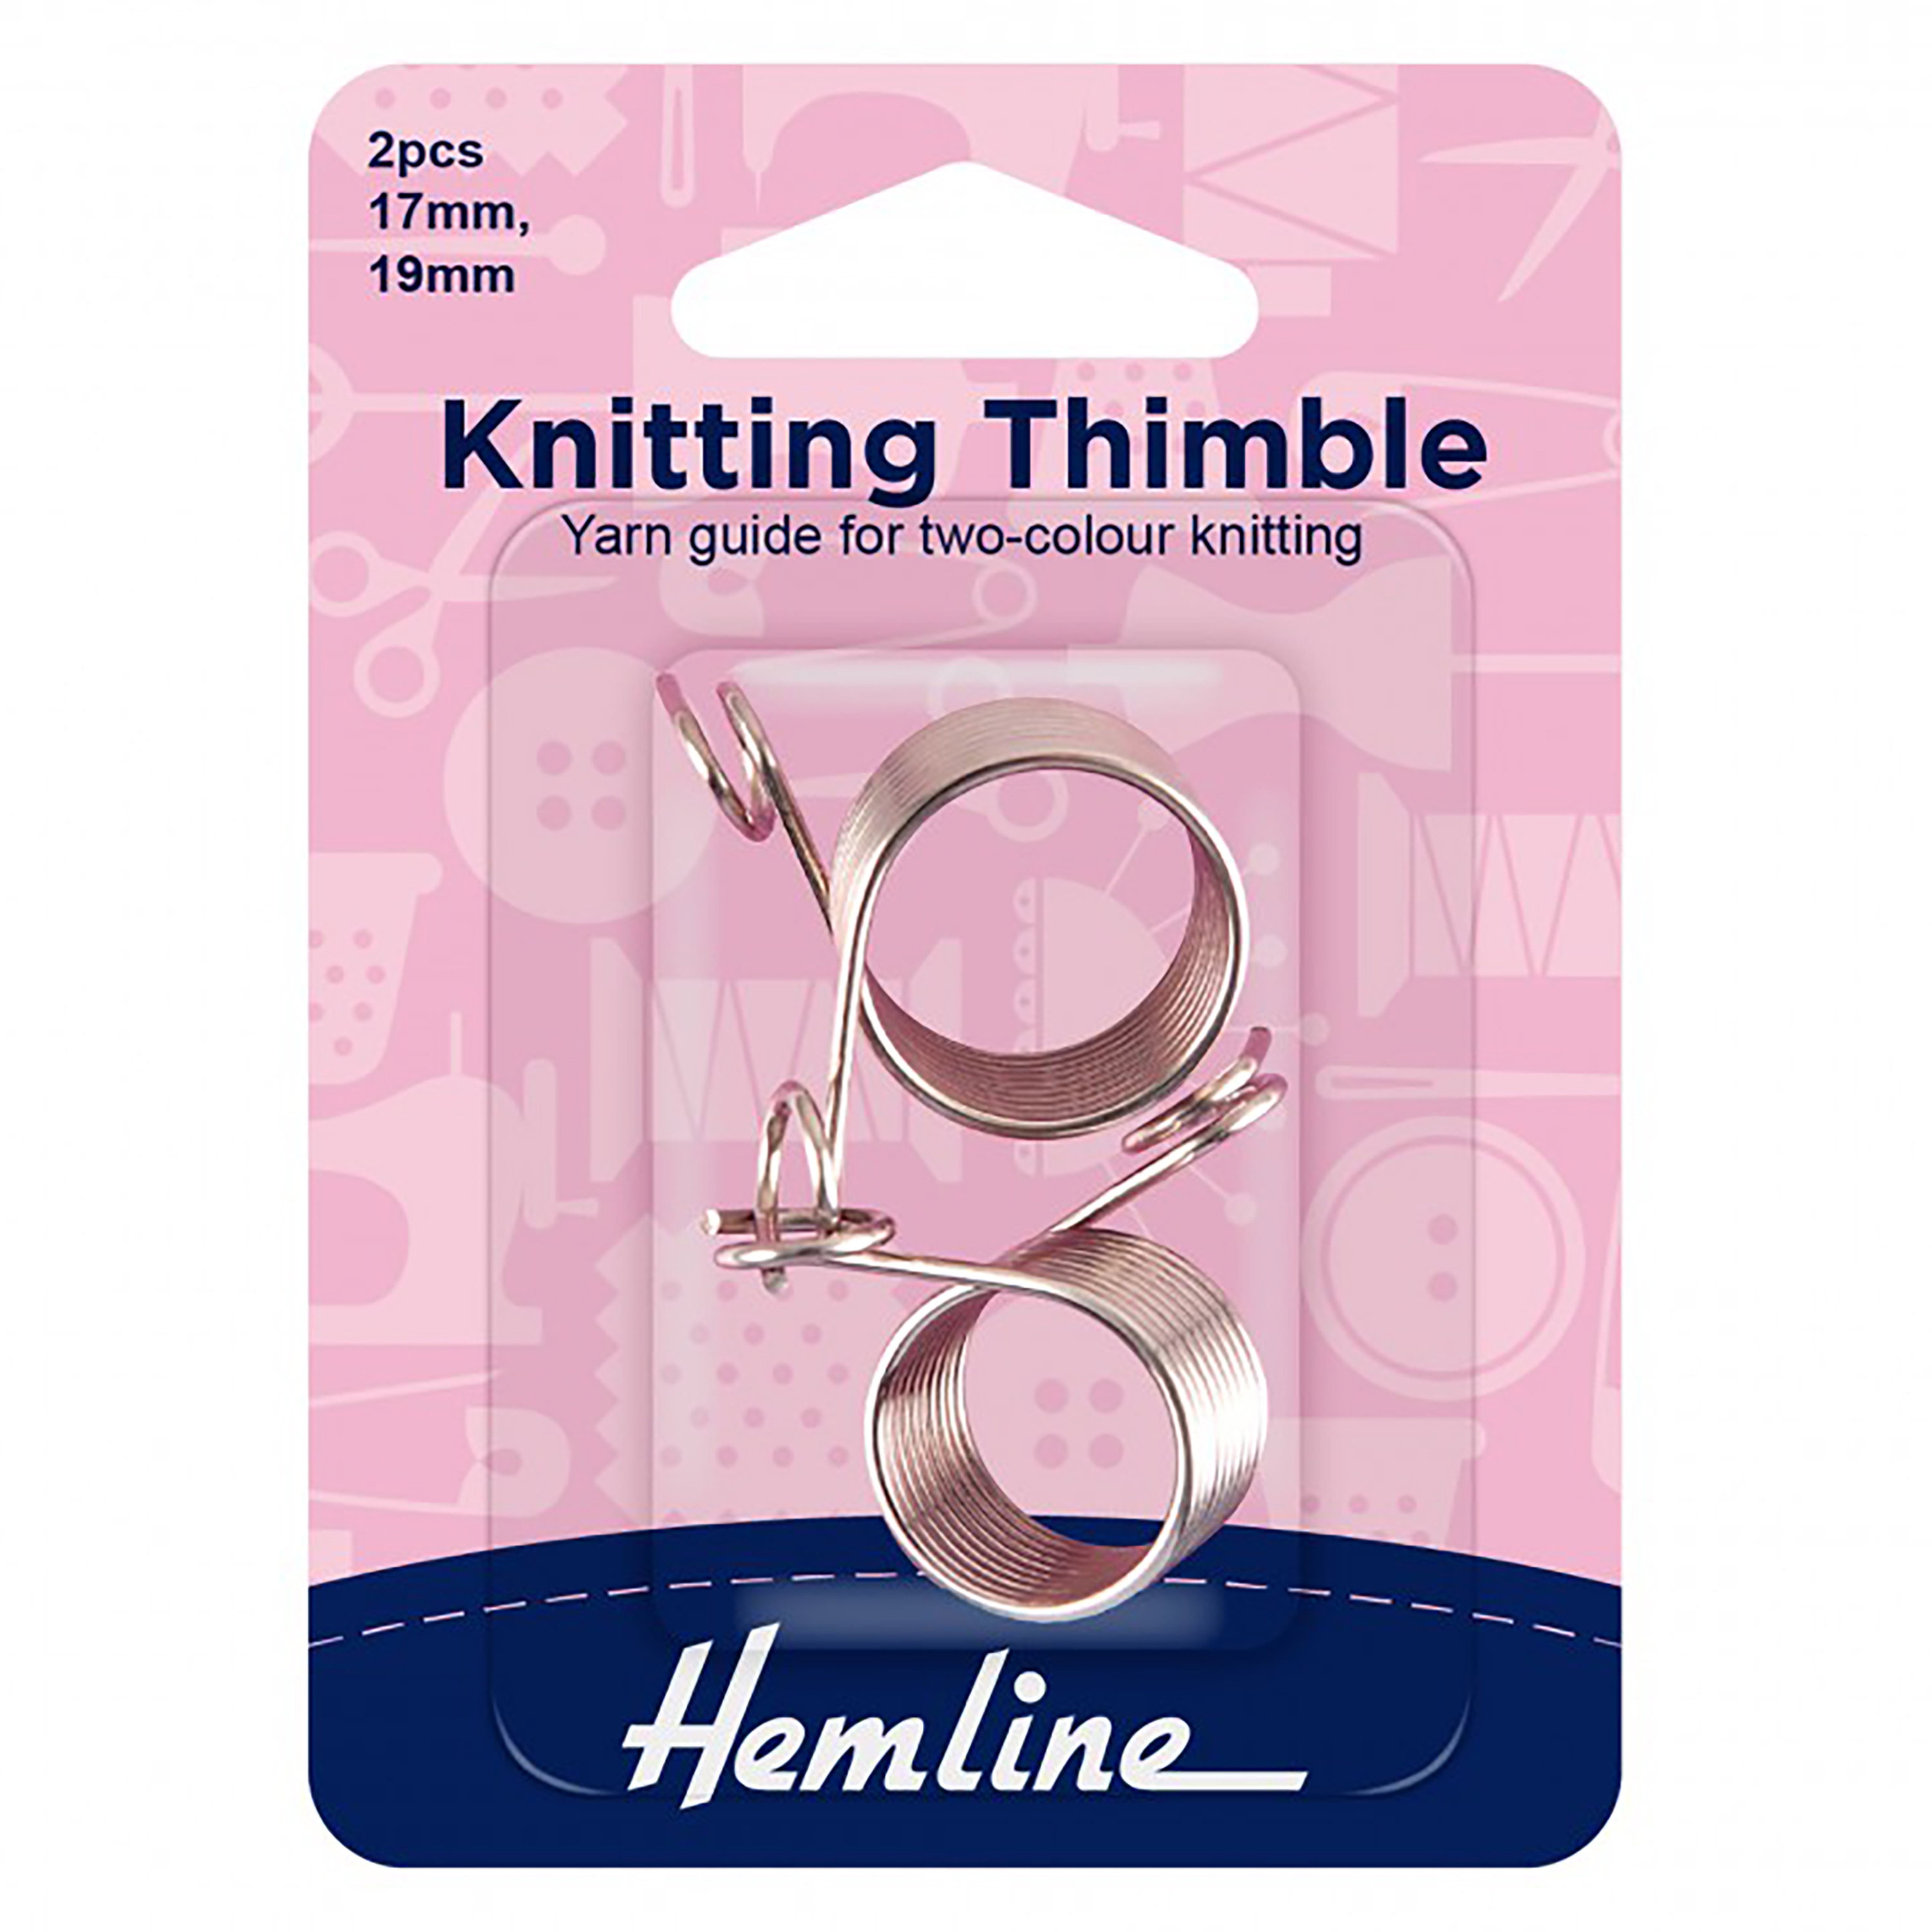 Norwegian Knitting Thimble by Loran/dritz. discontinued: No Longer  Available by Manufacturer Finger Yarn Guide for 2 Colors Knitting KT-2 